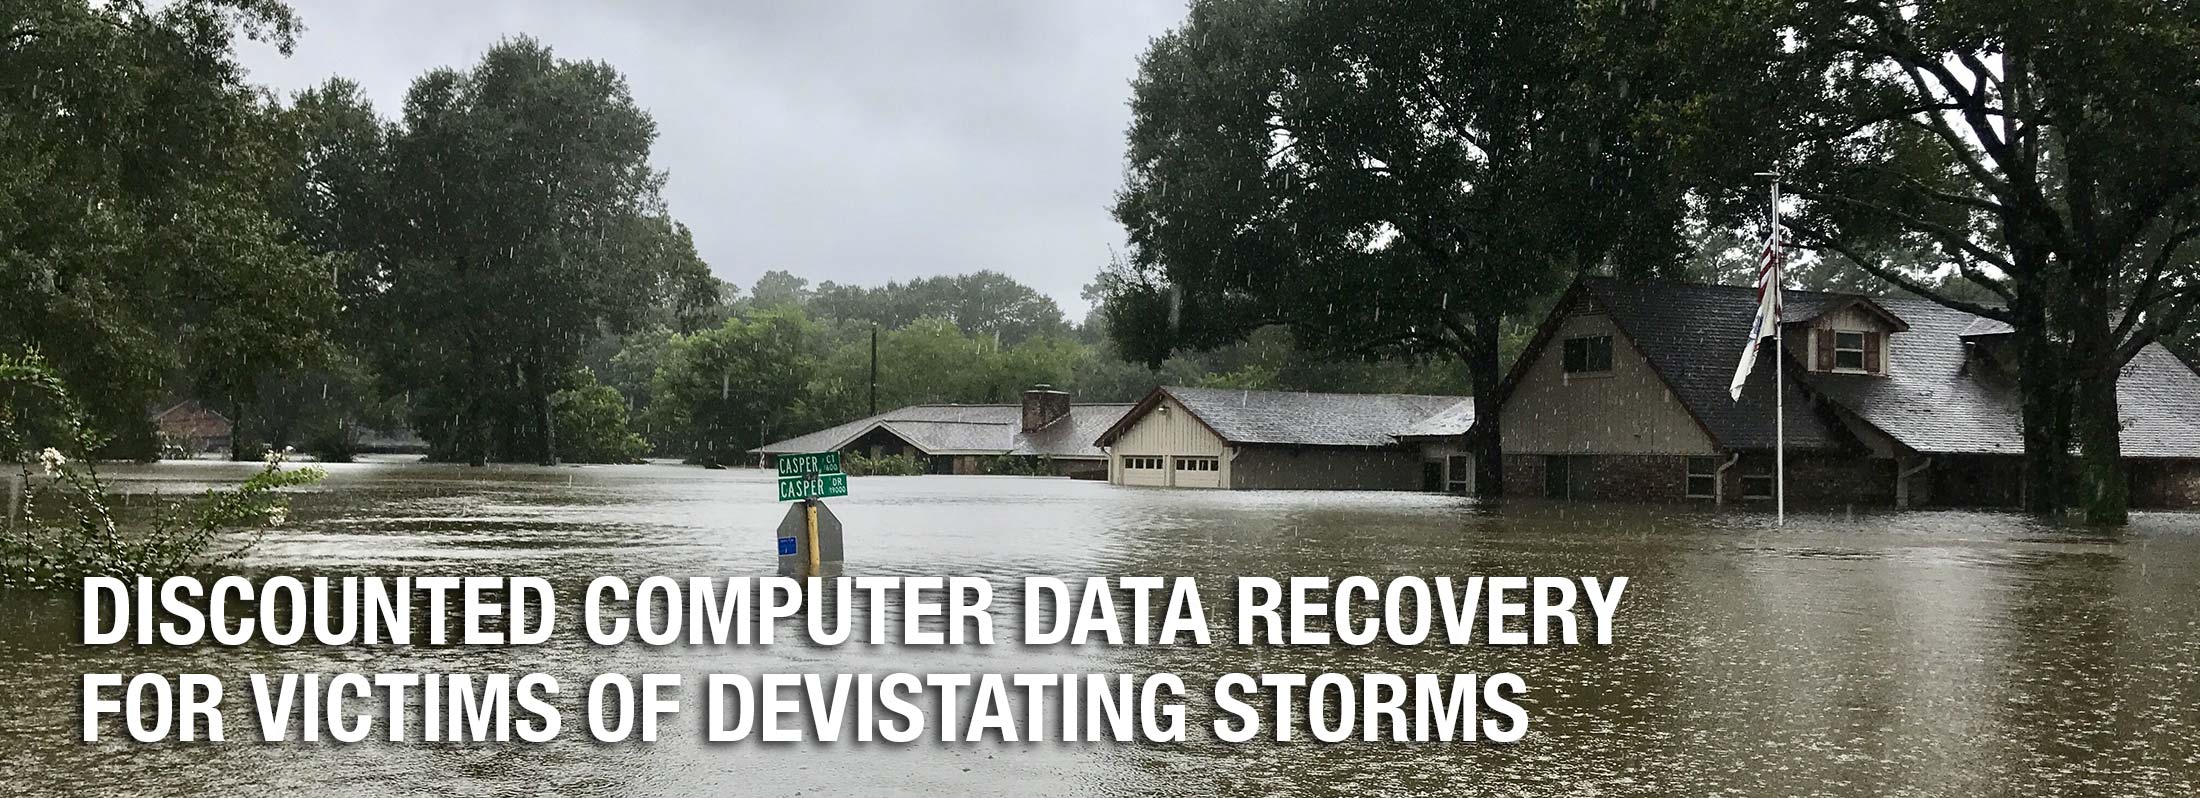 disaster data recovery fire flood recovery